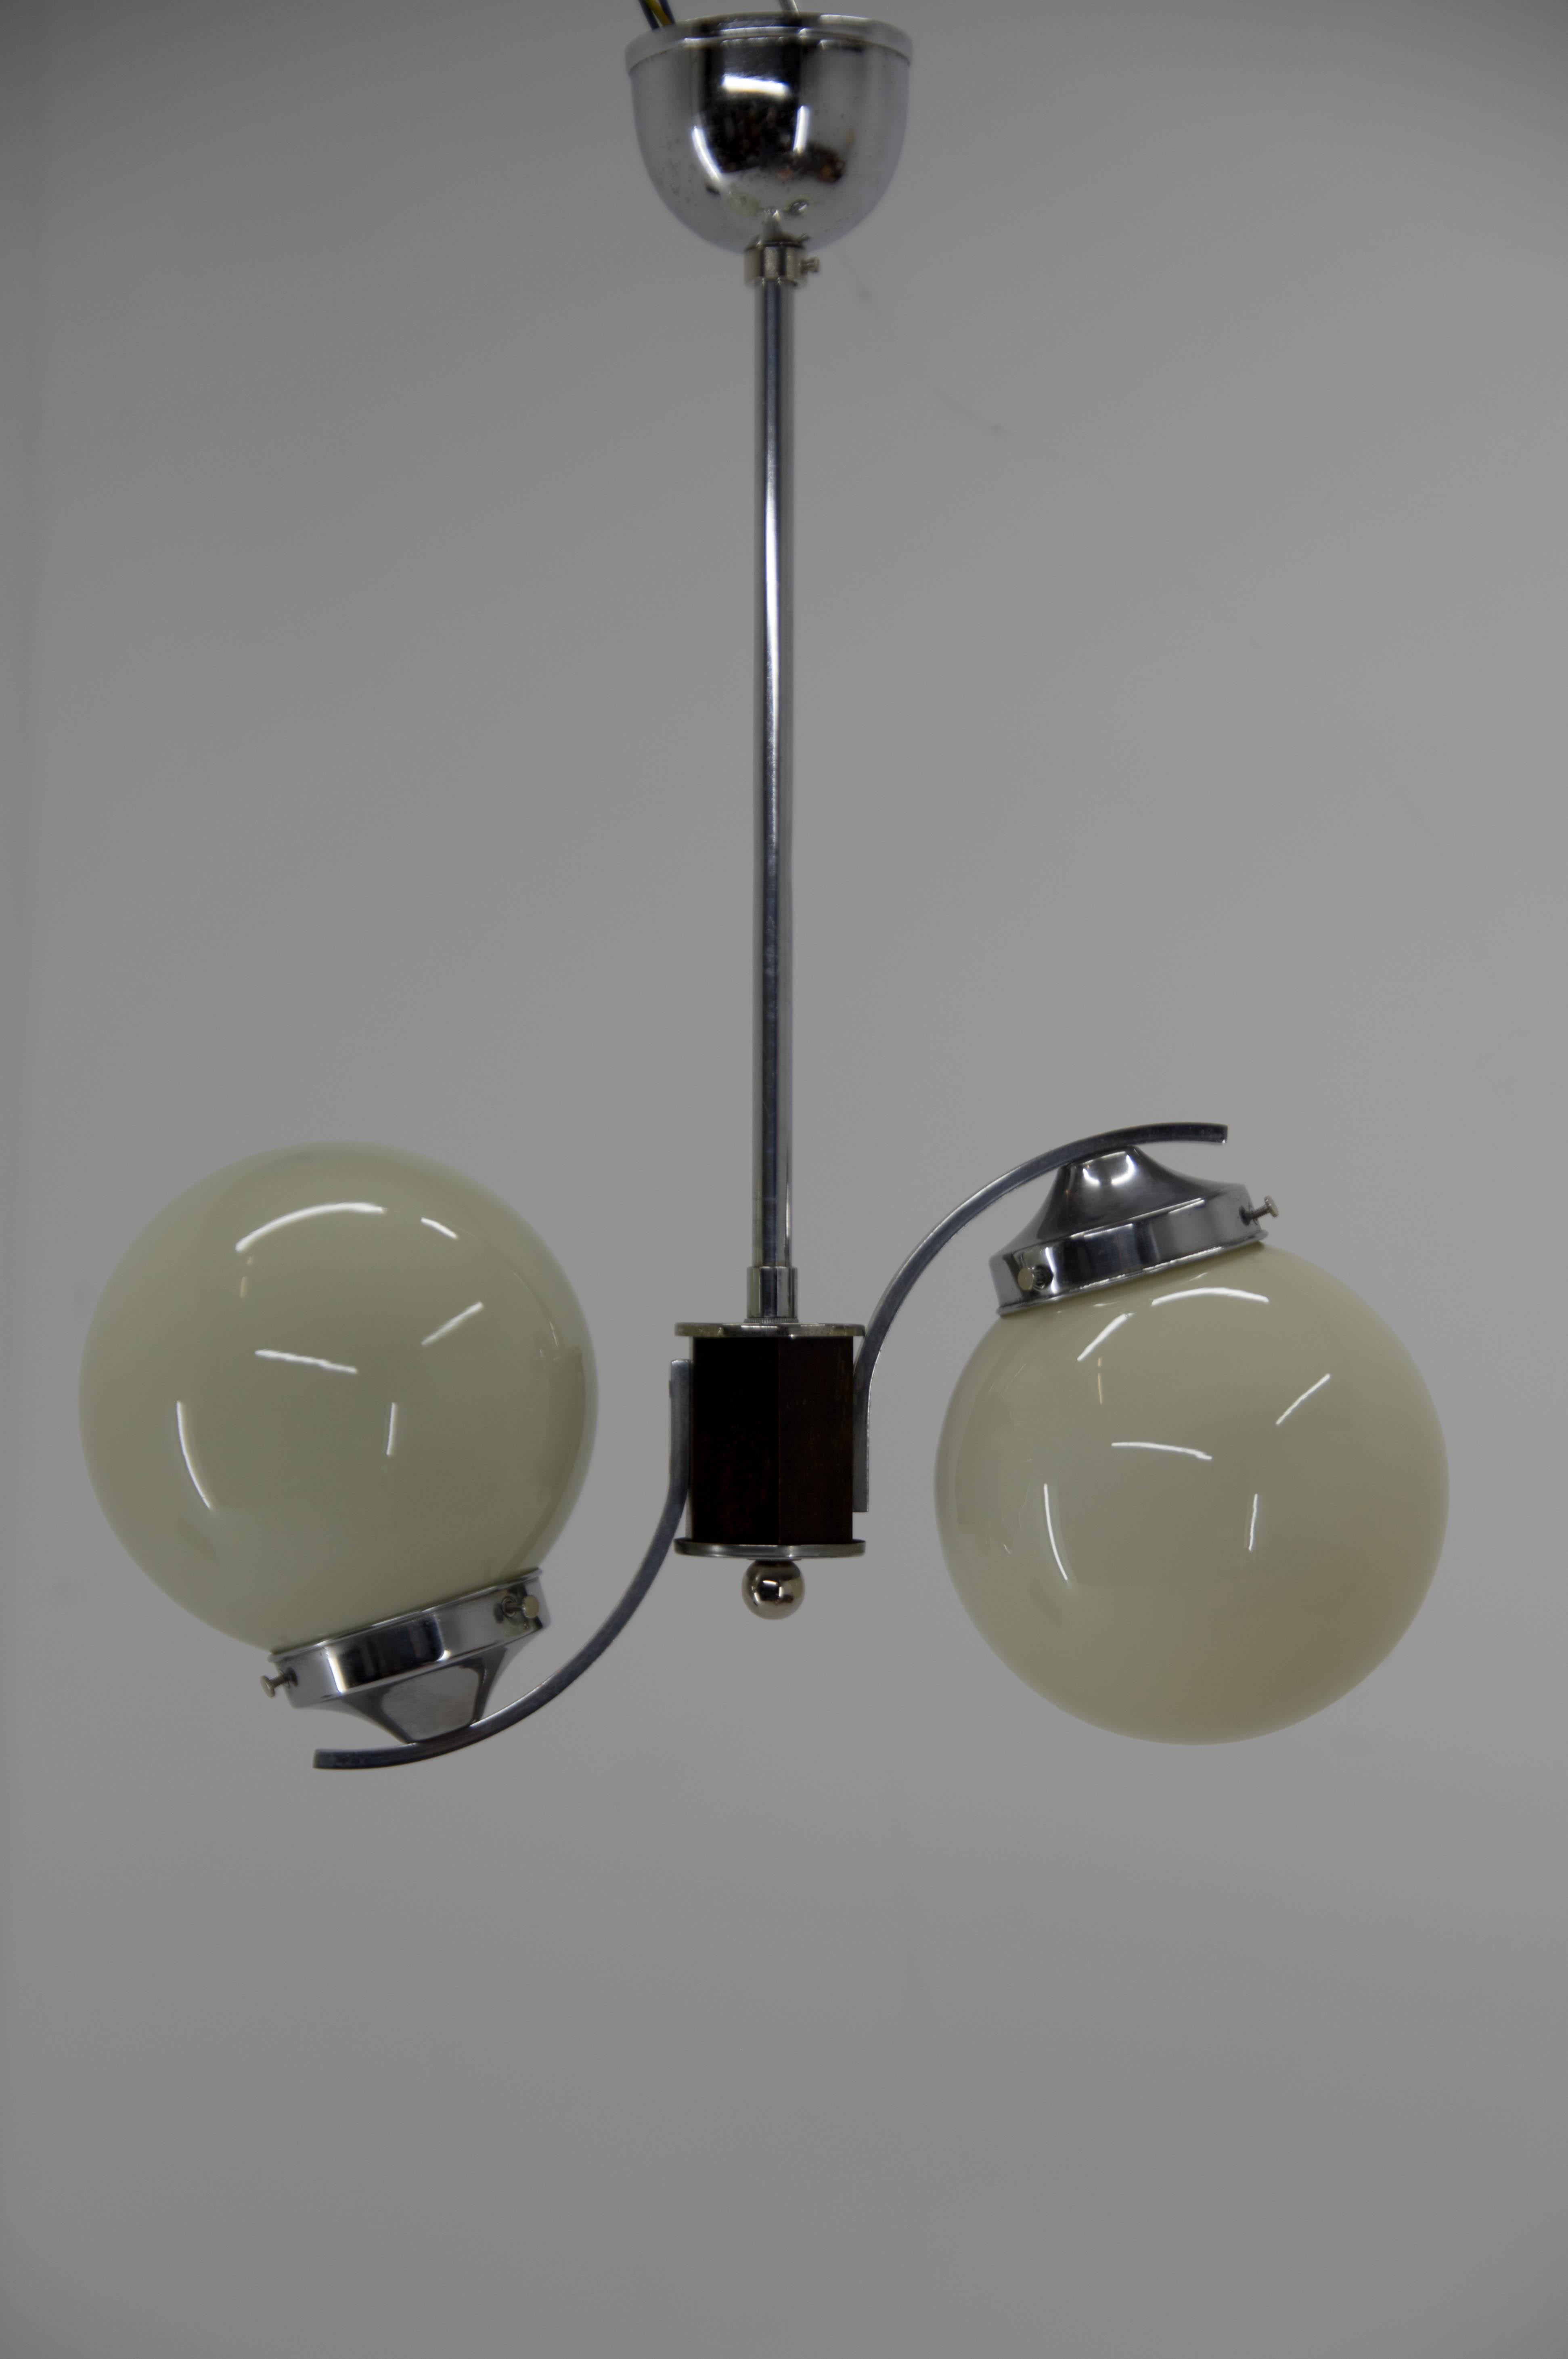 Two-flamming Art Deco chandelier attributed to Jindrich Halabala.
Chrome with minor age patina - polished
Glass in perfect condition.
Rewired - 2 x 60 W, E25-E27 bulbs
US wiring compatible.